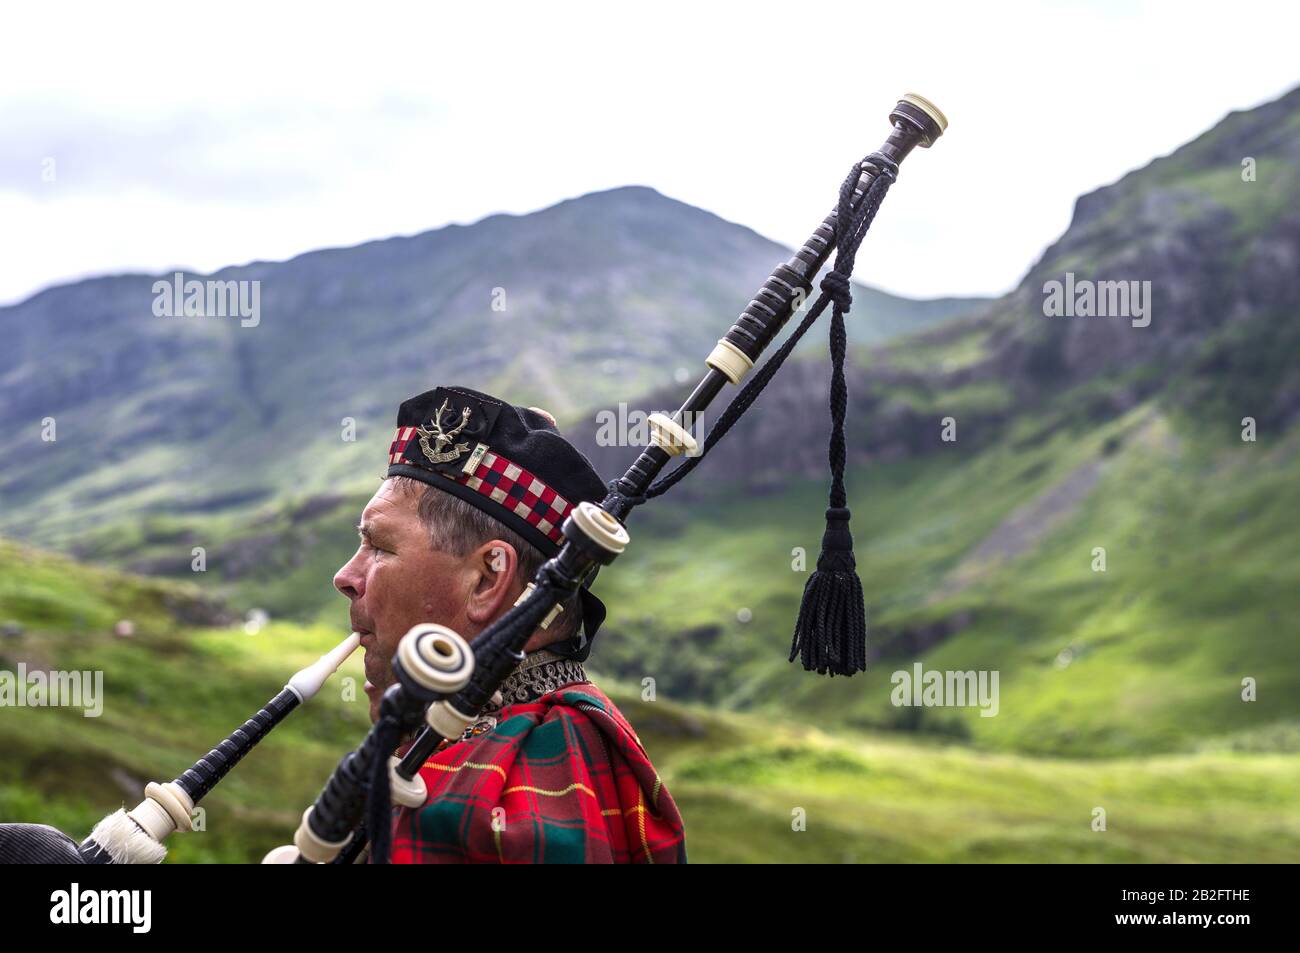 bagpipe player with wind blowing up skirt